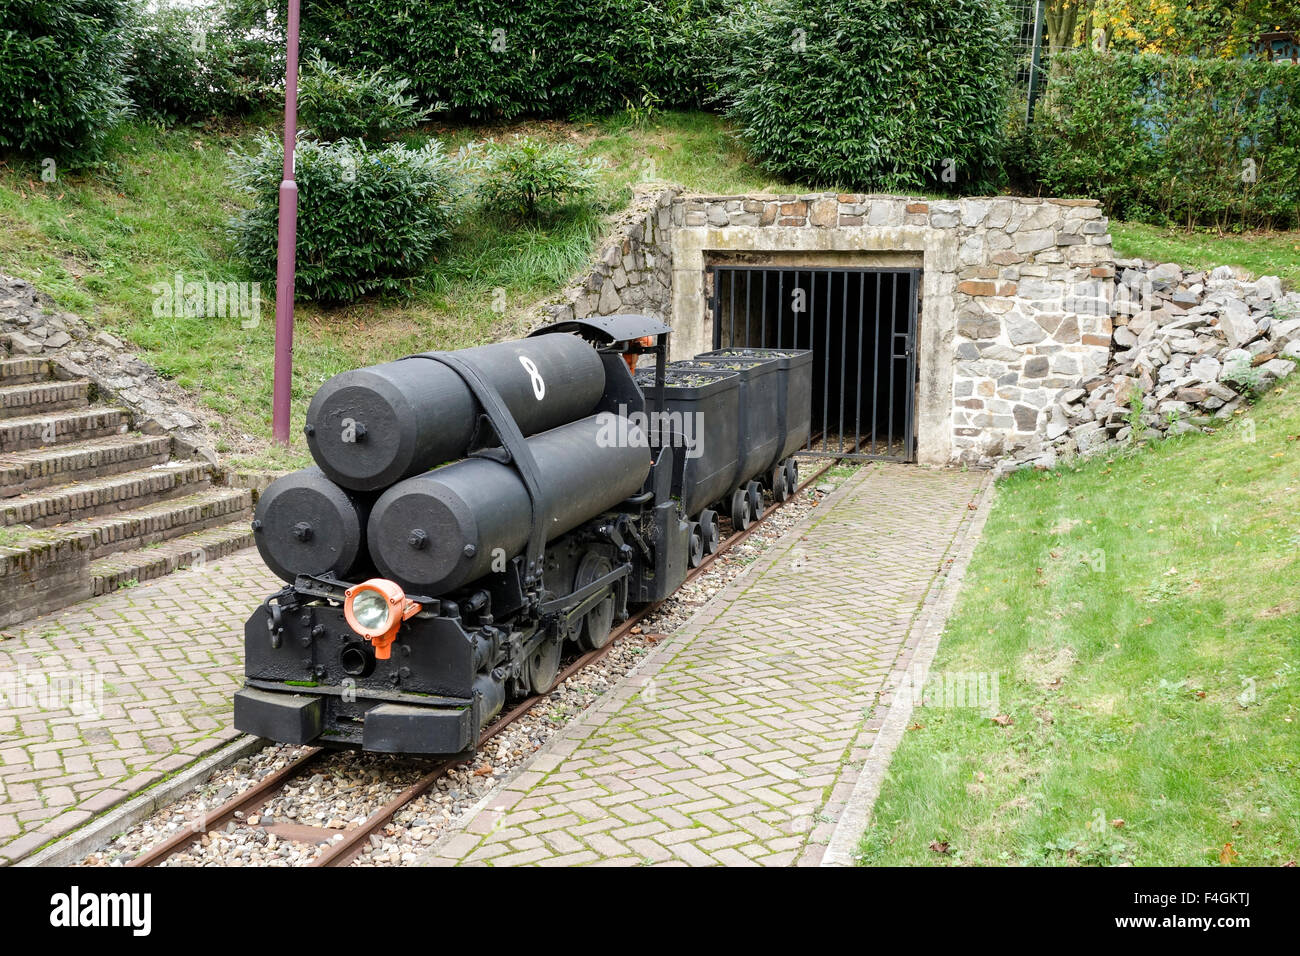 Compressed-air mine locomotive for transport of Coal out of mine, Terwinselen, Limburg, Netherlands. Stock Photo